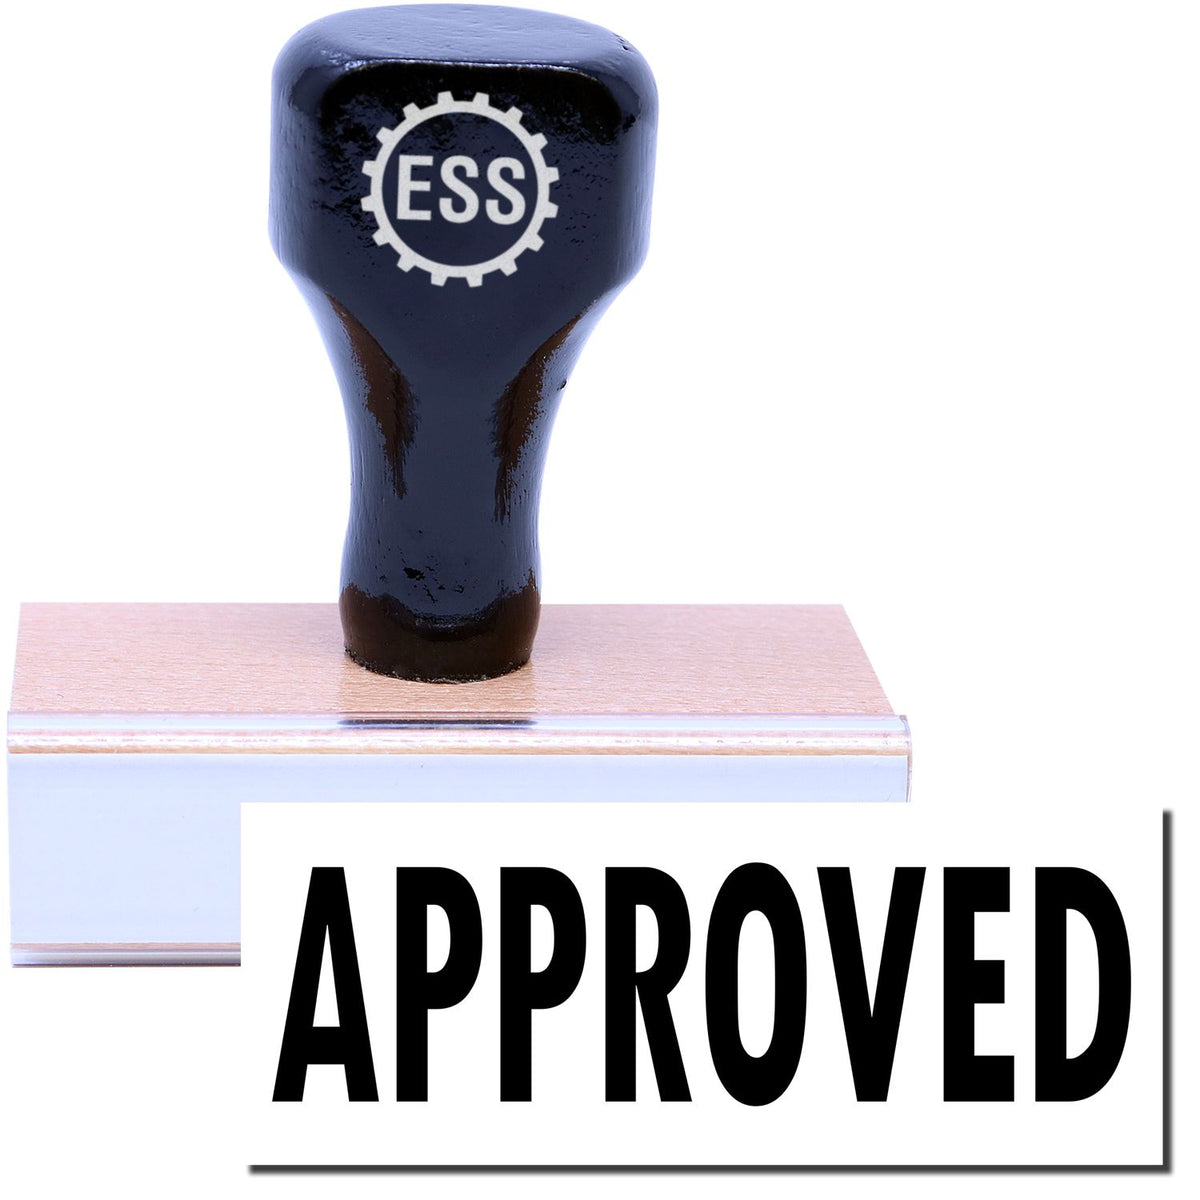 A stock office rubber stamp with a stamped image showing how the text &quot;APPROVED&quot; is displayed after stamping.